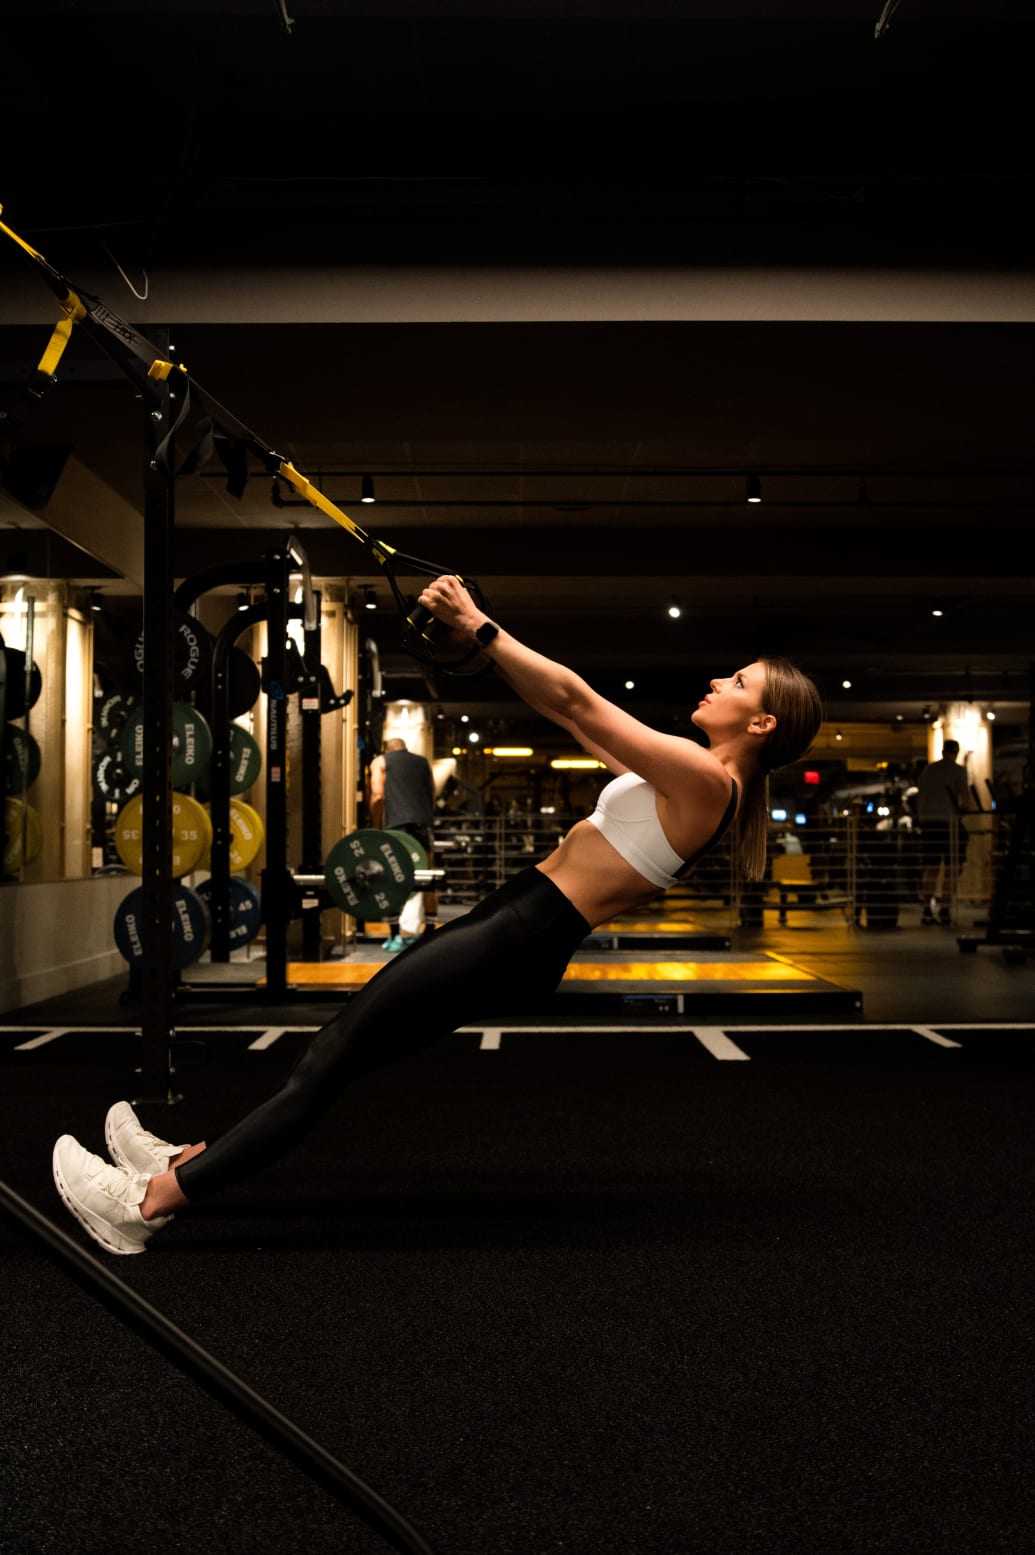 A photograph of Megan Lange training in a gym.